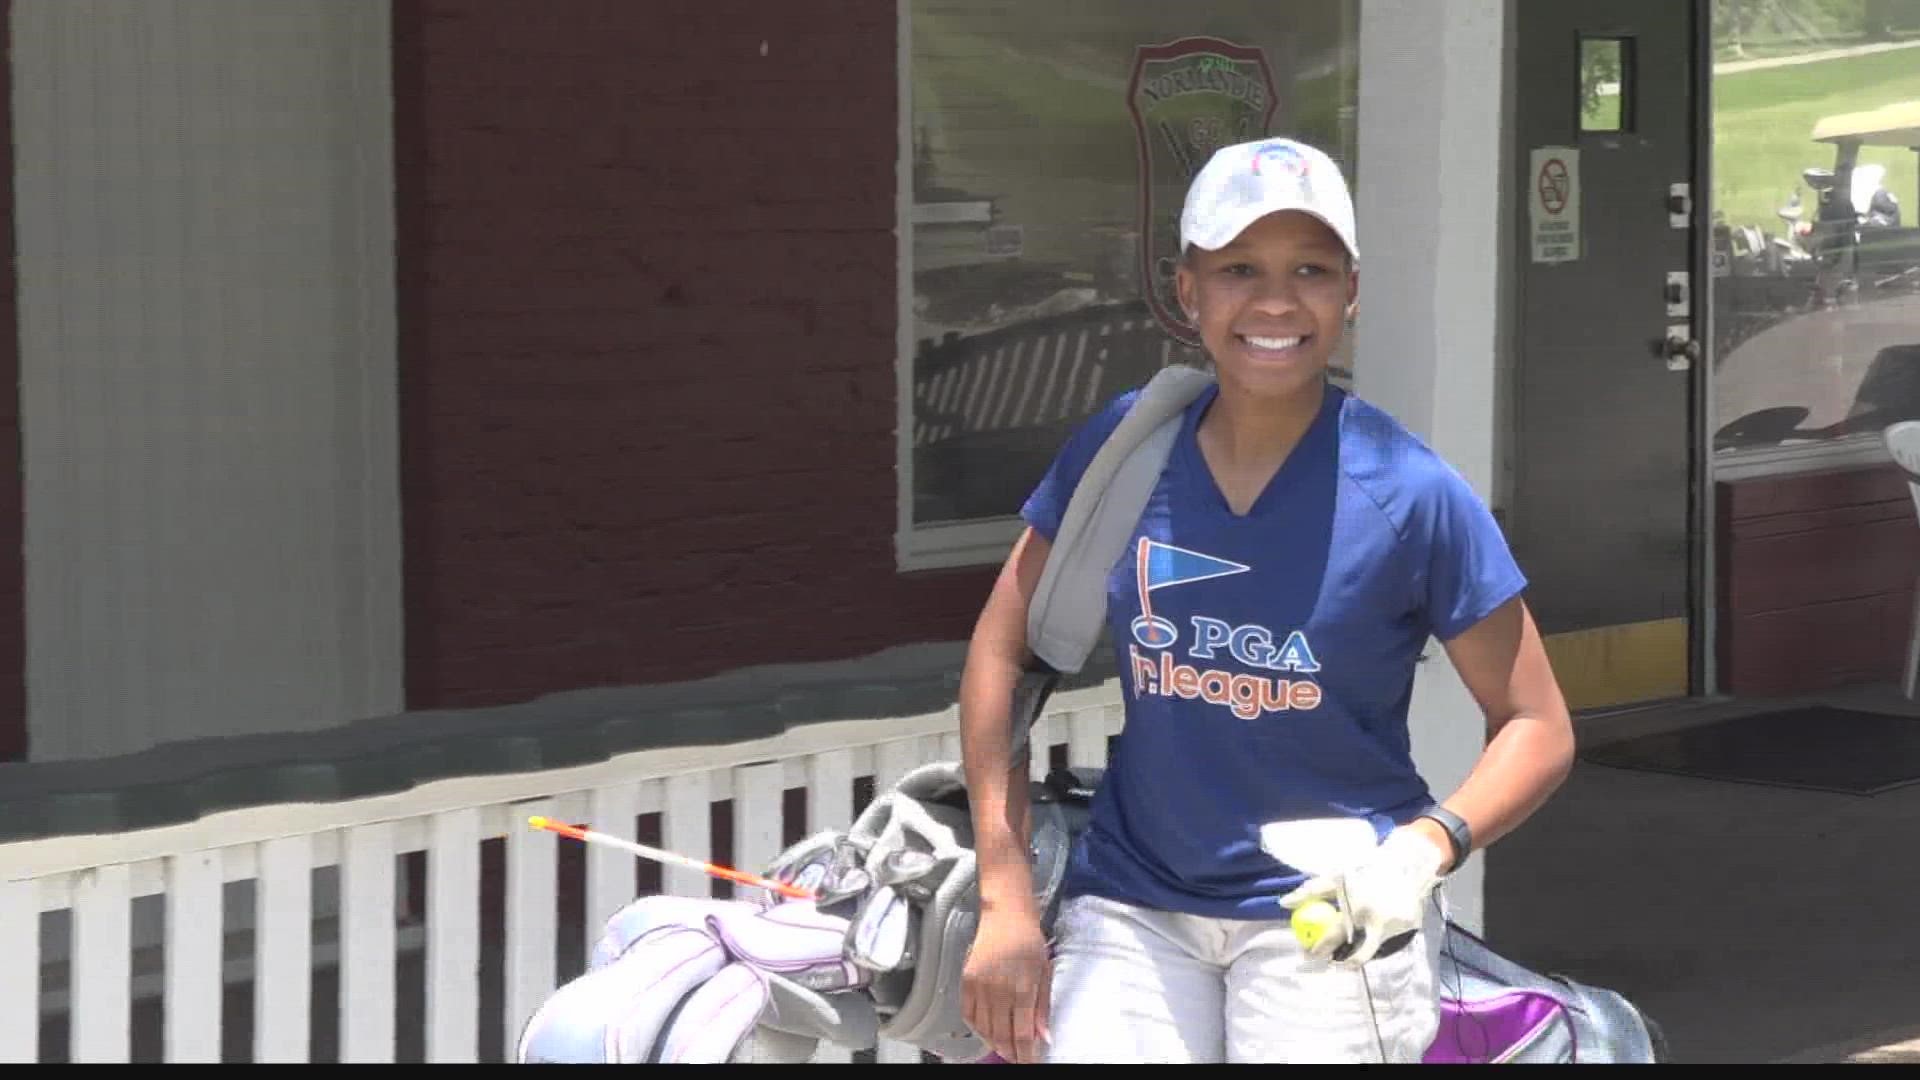 Anandra Chaney is the lone golfer for Normandy High School. But her dedication to the sport is hoping to change that.